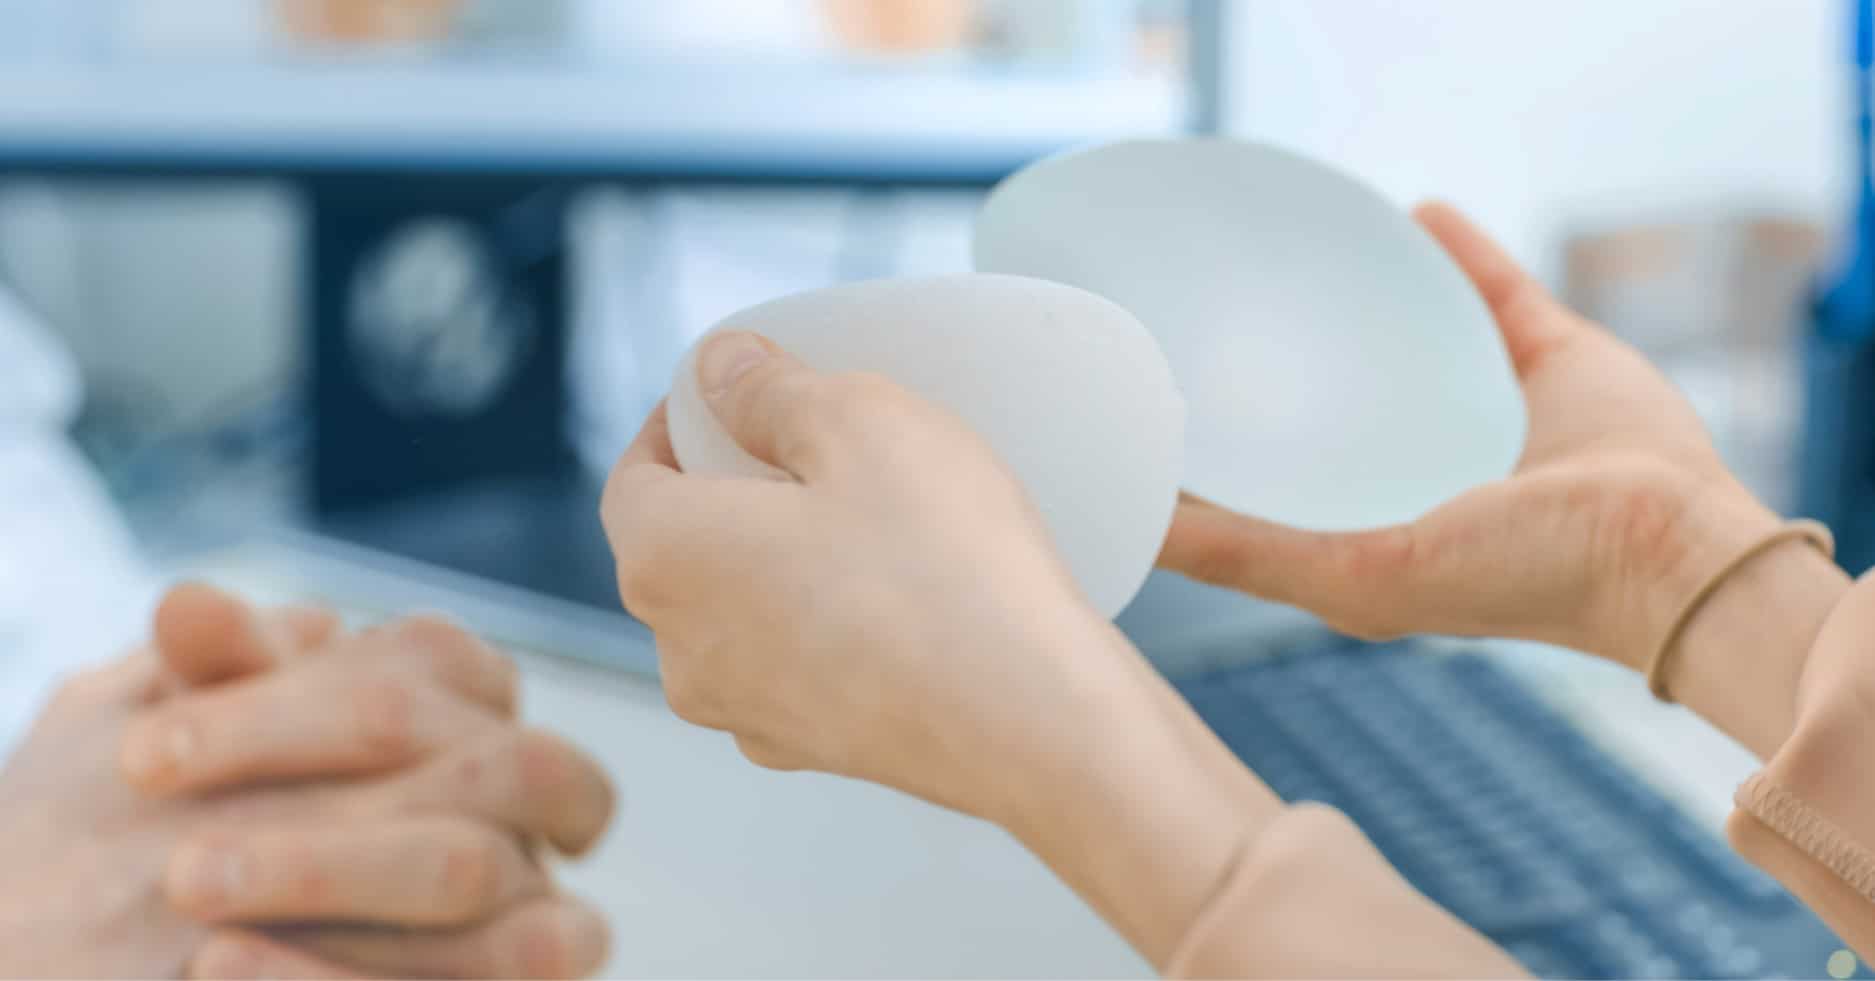 Breast Implants - 10 Things You Need to Know Before Getting One